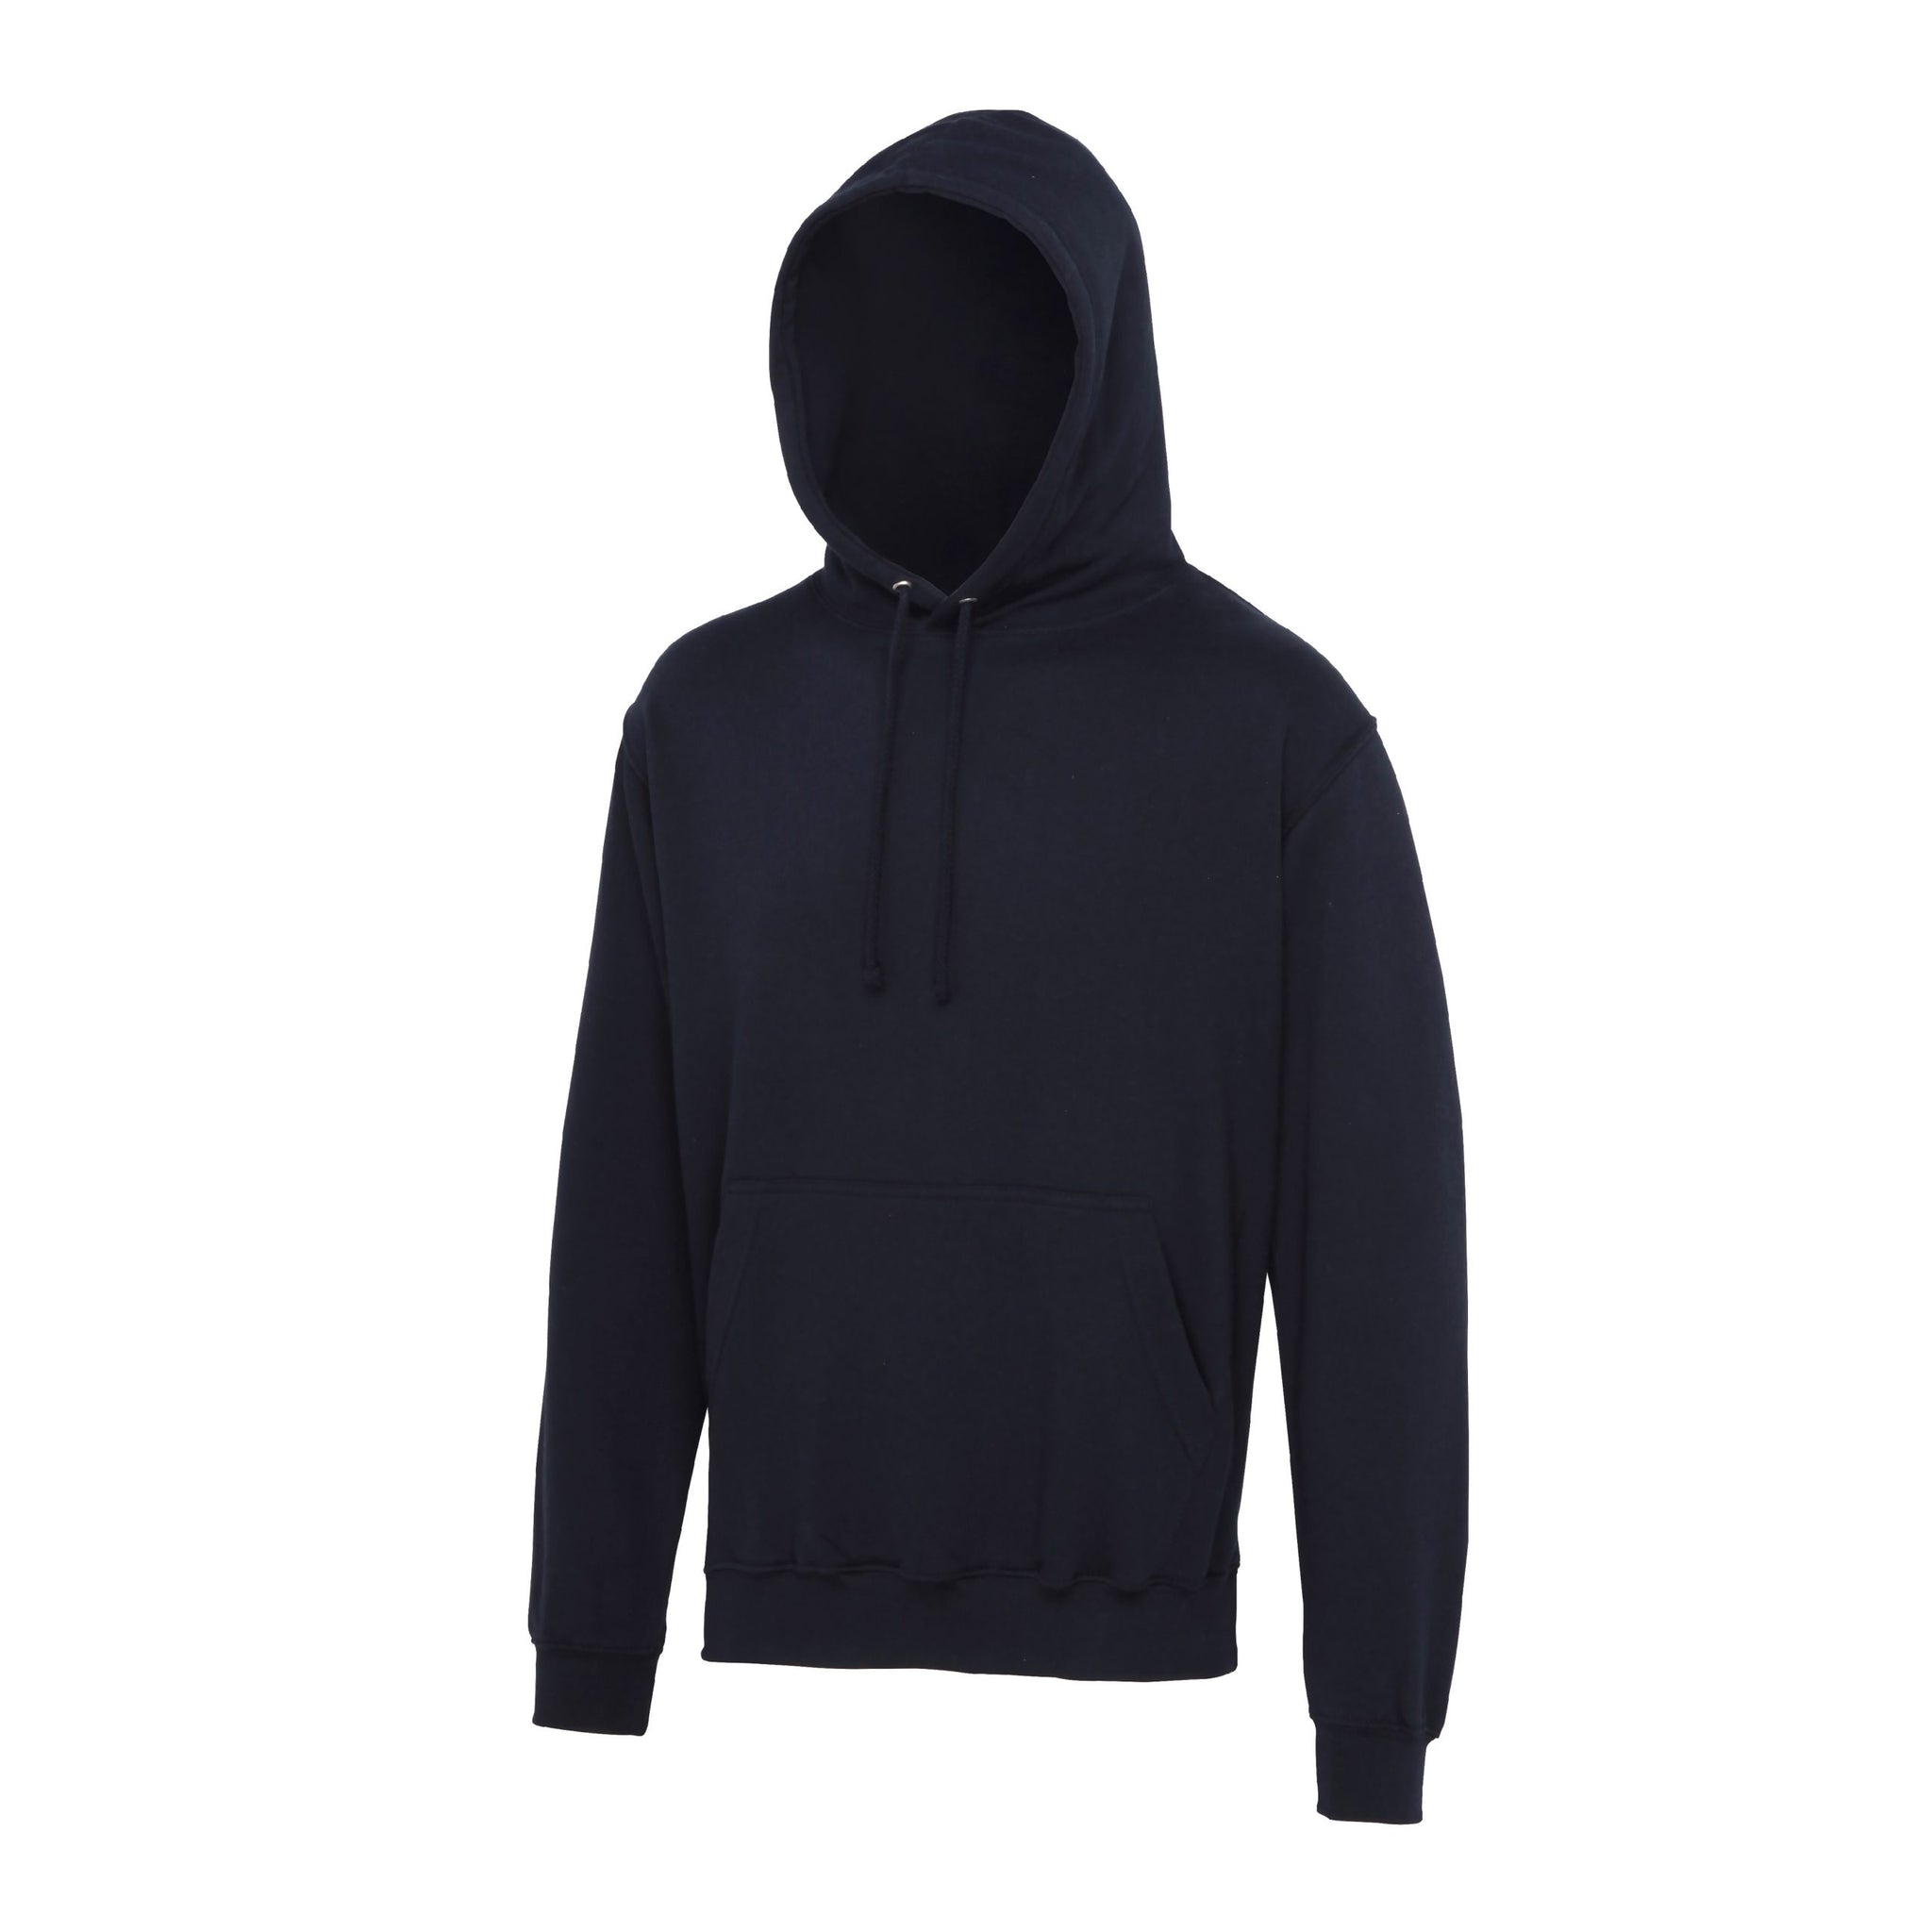 Small French Navy Hoodie - choose logo